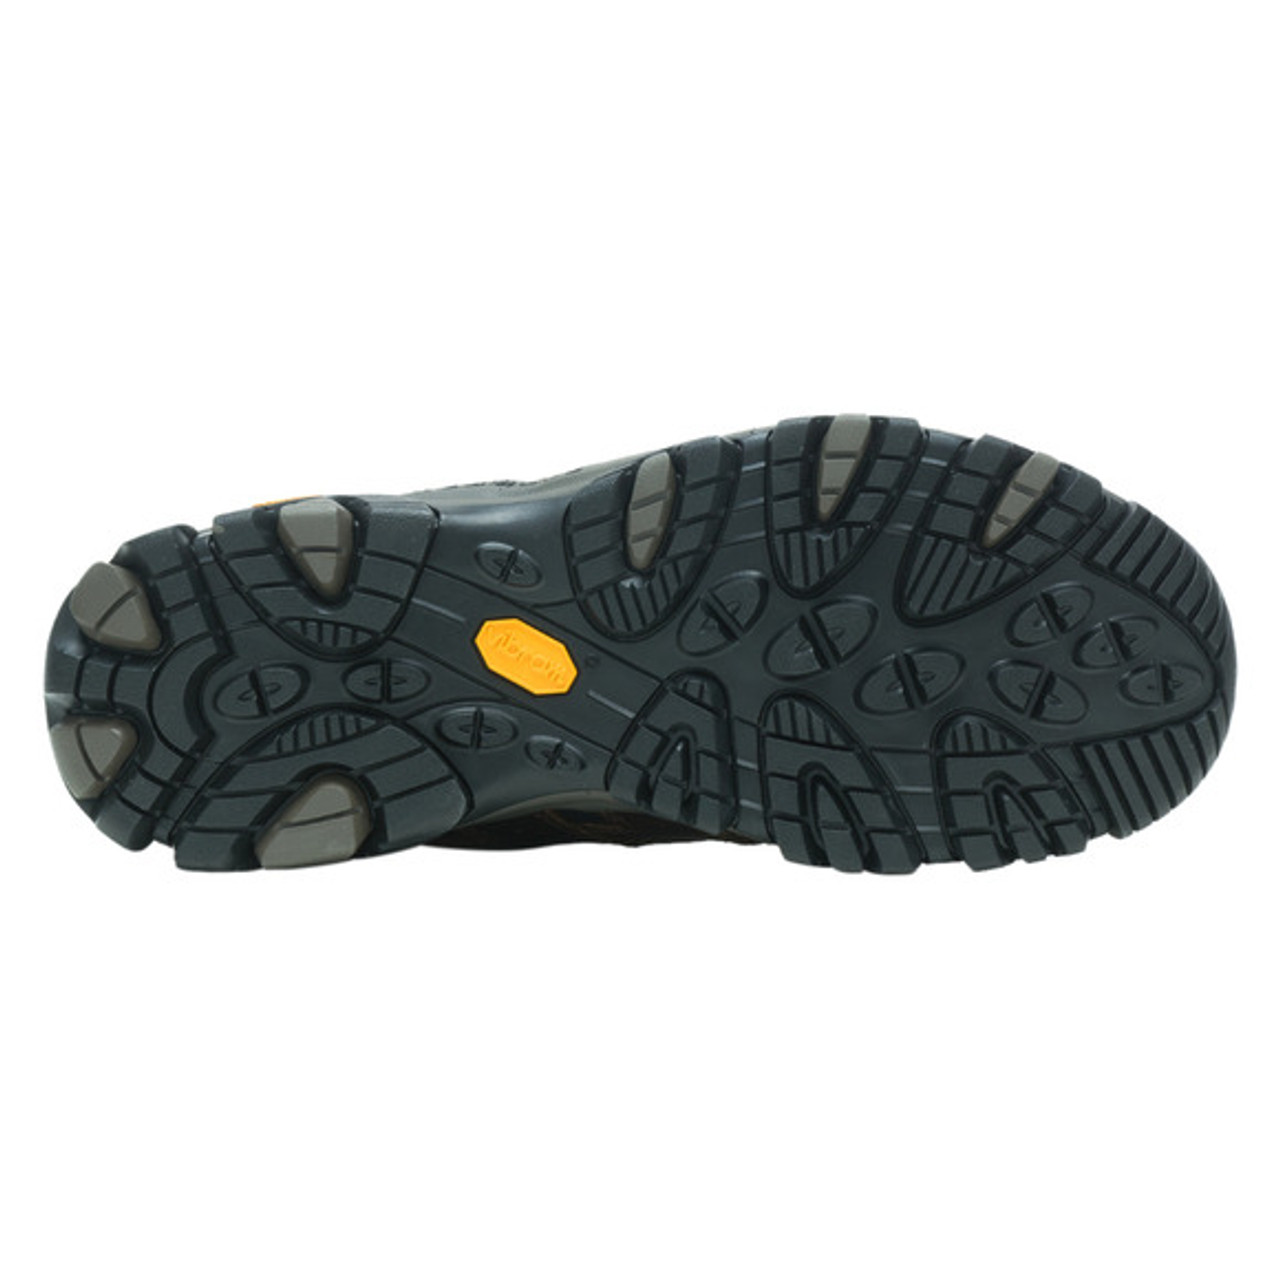 Moab 3 Thermo Mid Waterproof Boot - Merrell | Snowpack